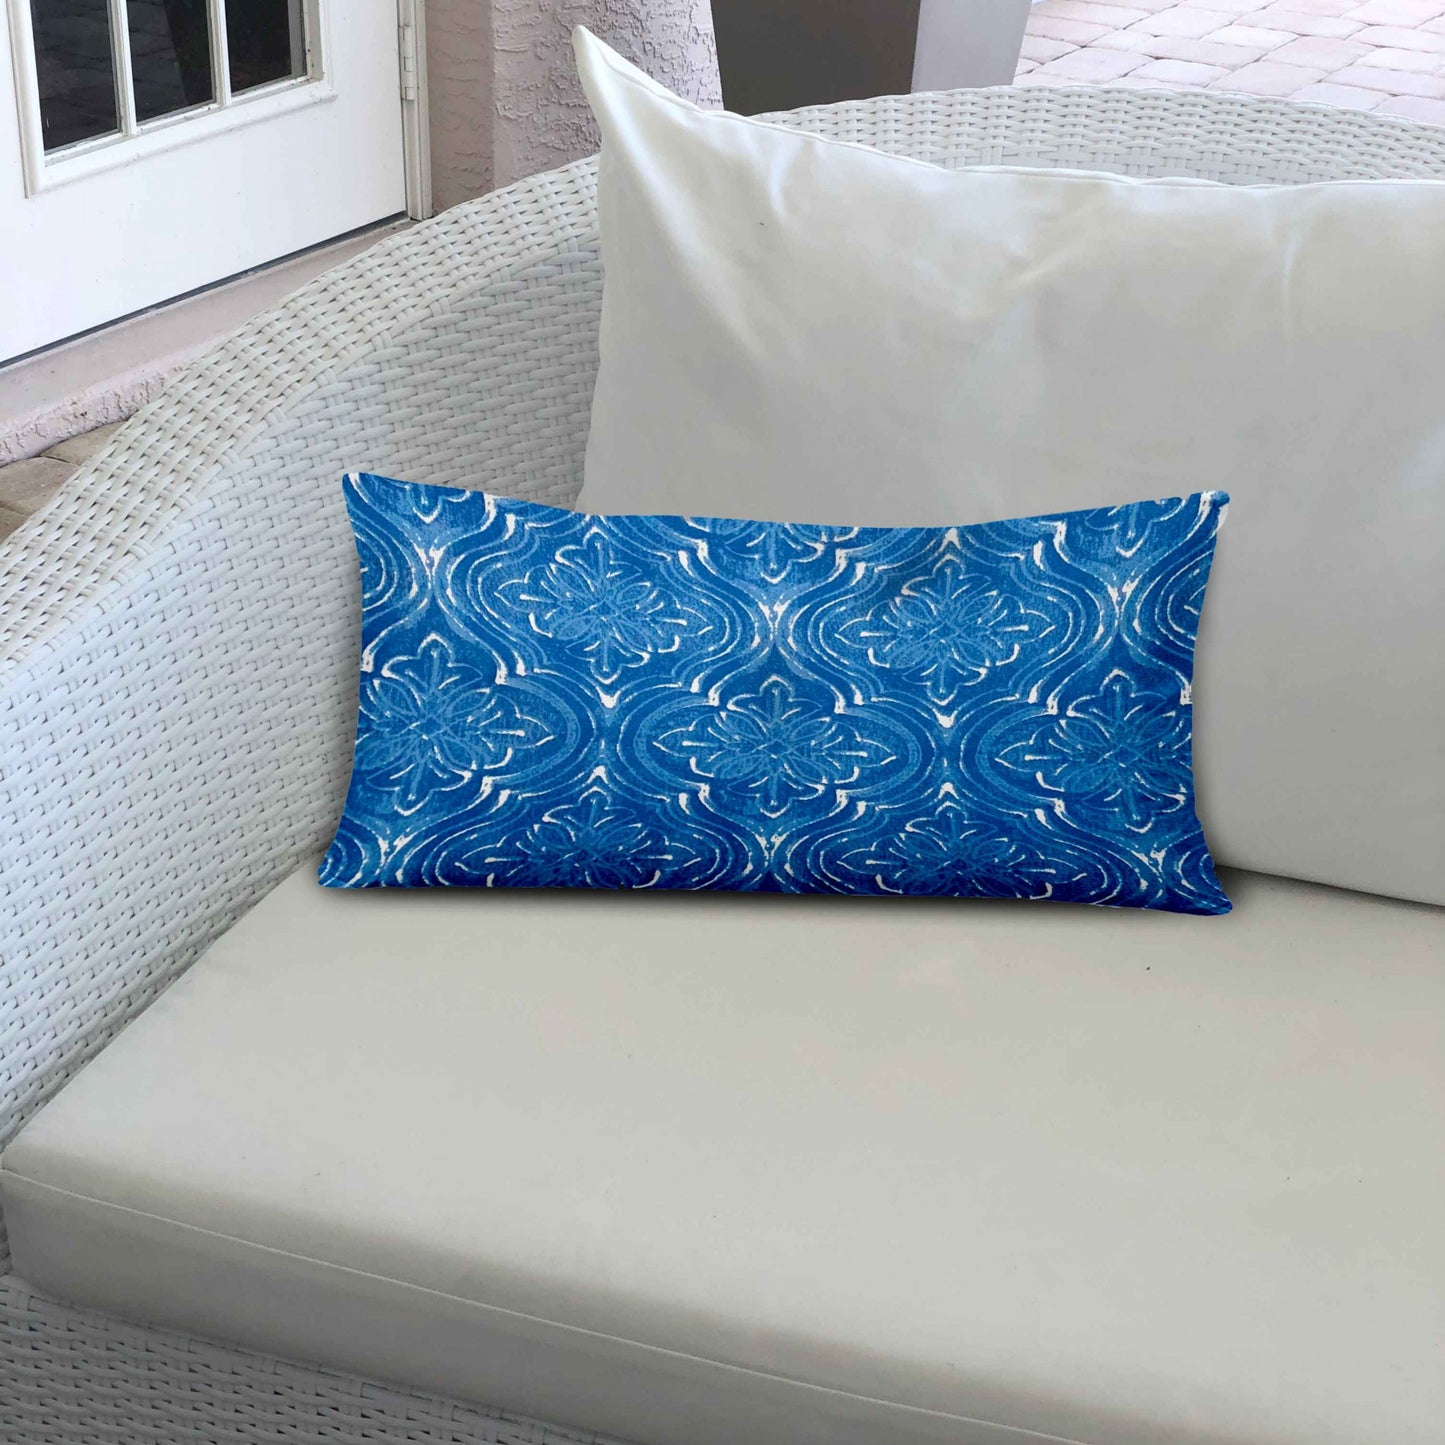 16" X 26" Blue And White Enveloped Ikat Lumbar Indoor Outdoor Pillow Cover